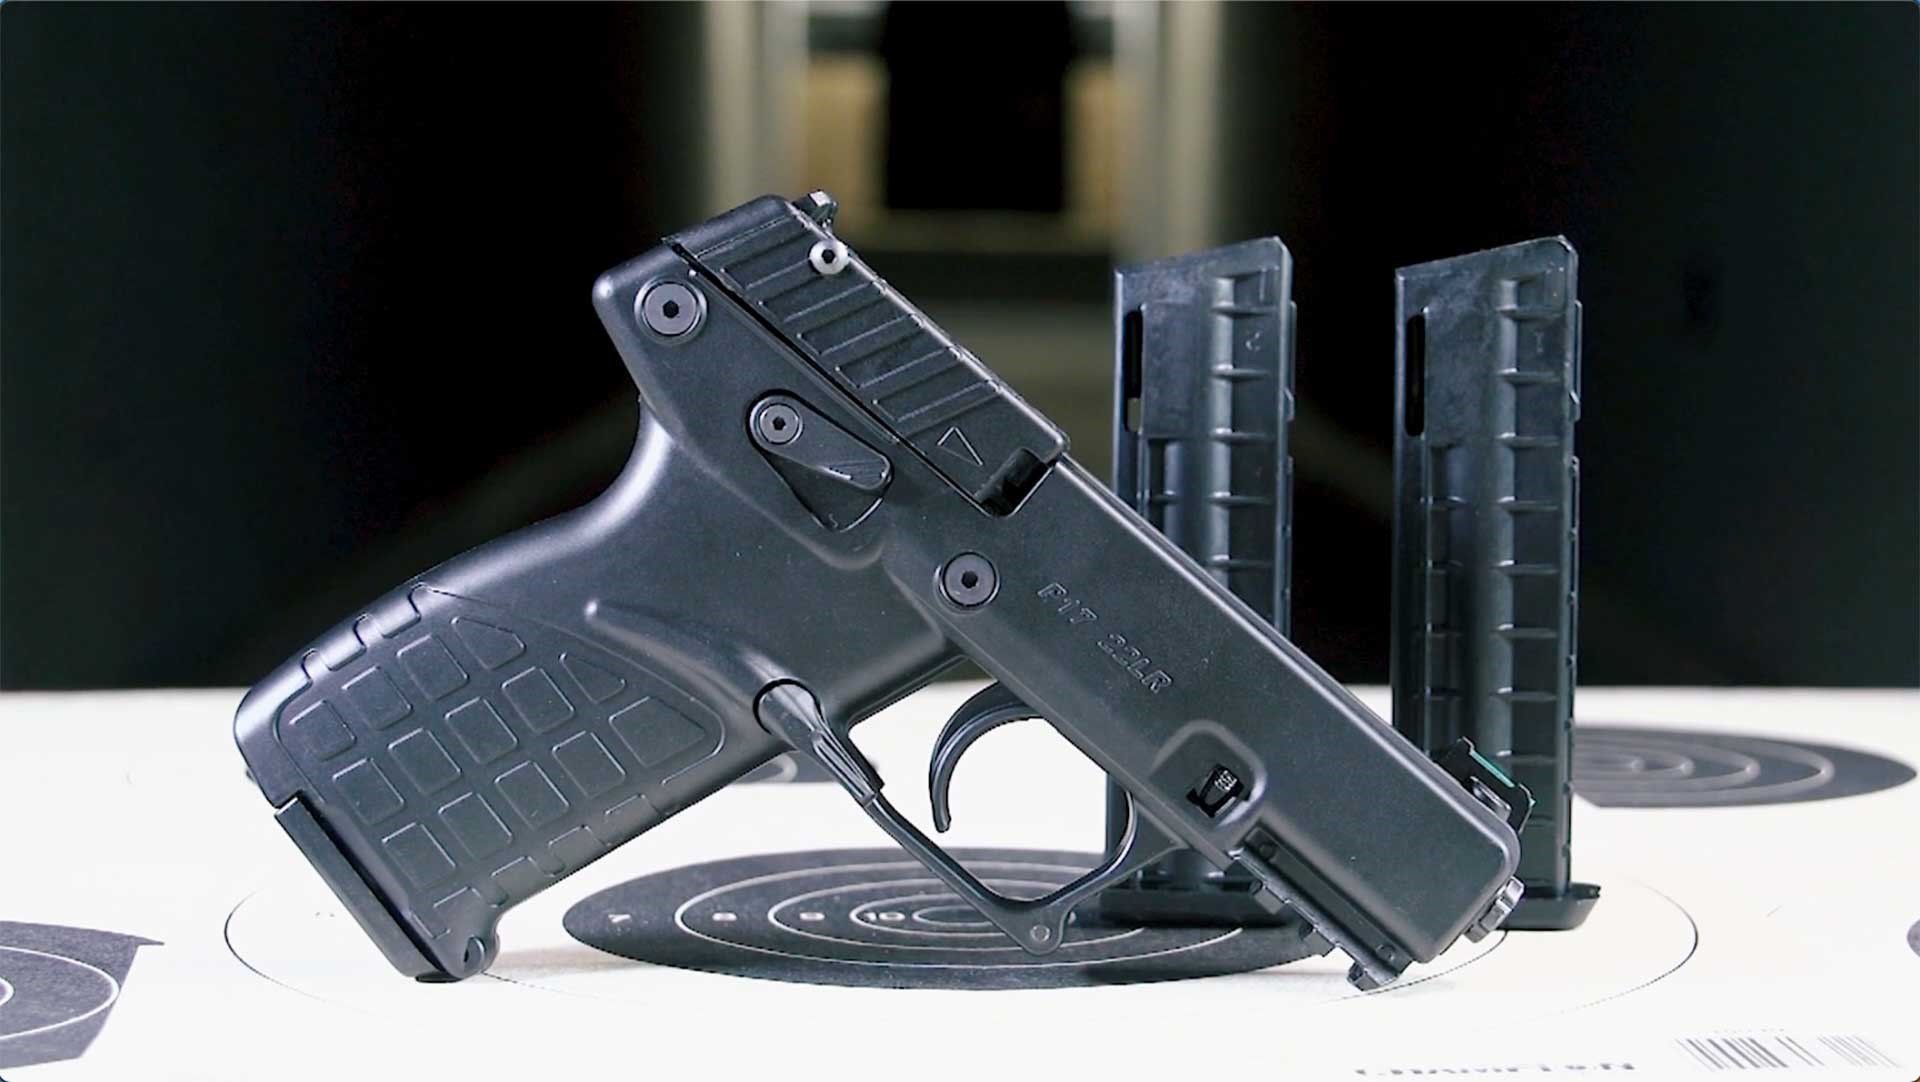 Right side of the black KelTec P17 shown on a dark range, alongside two spare magazines.